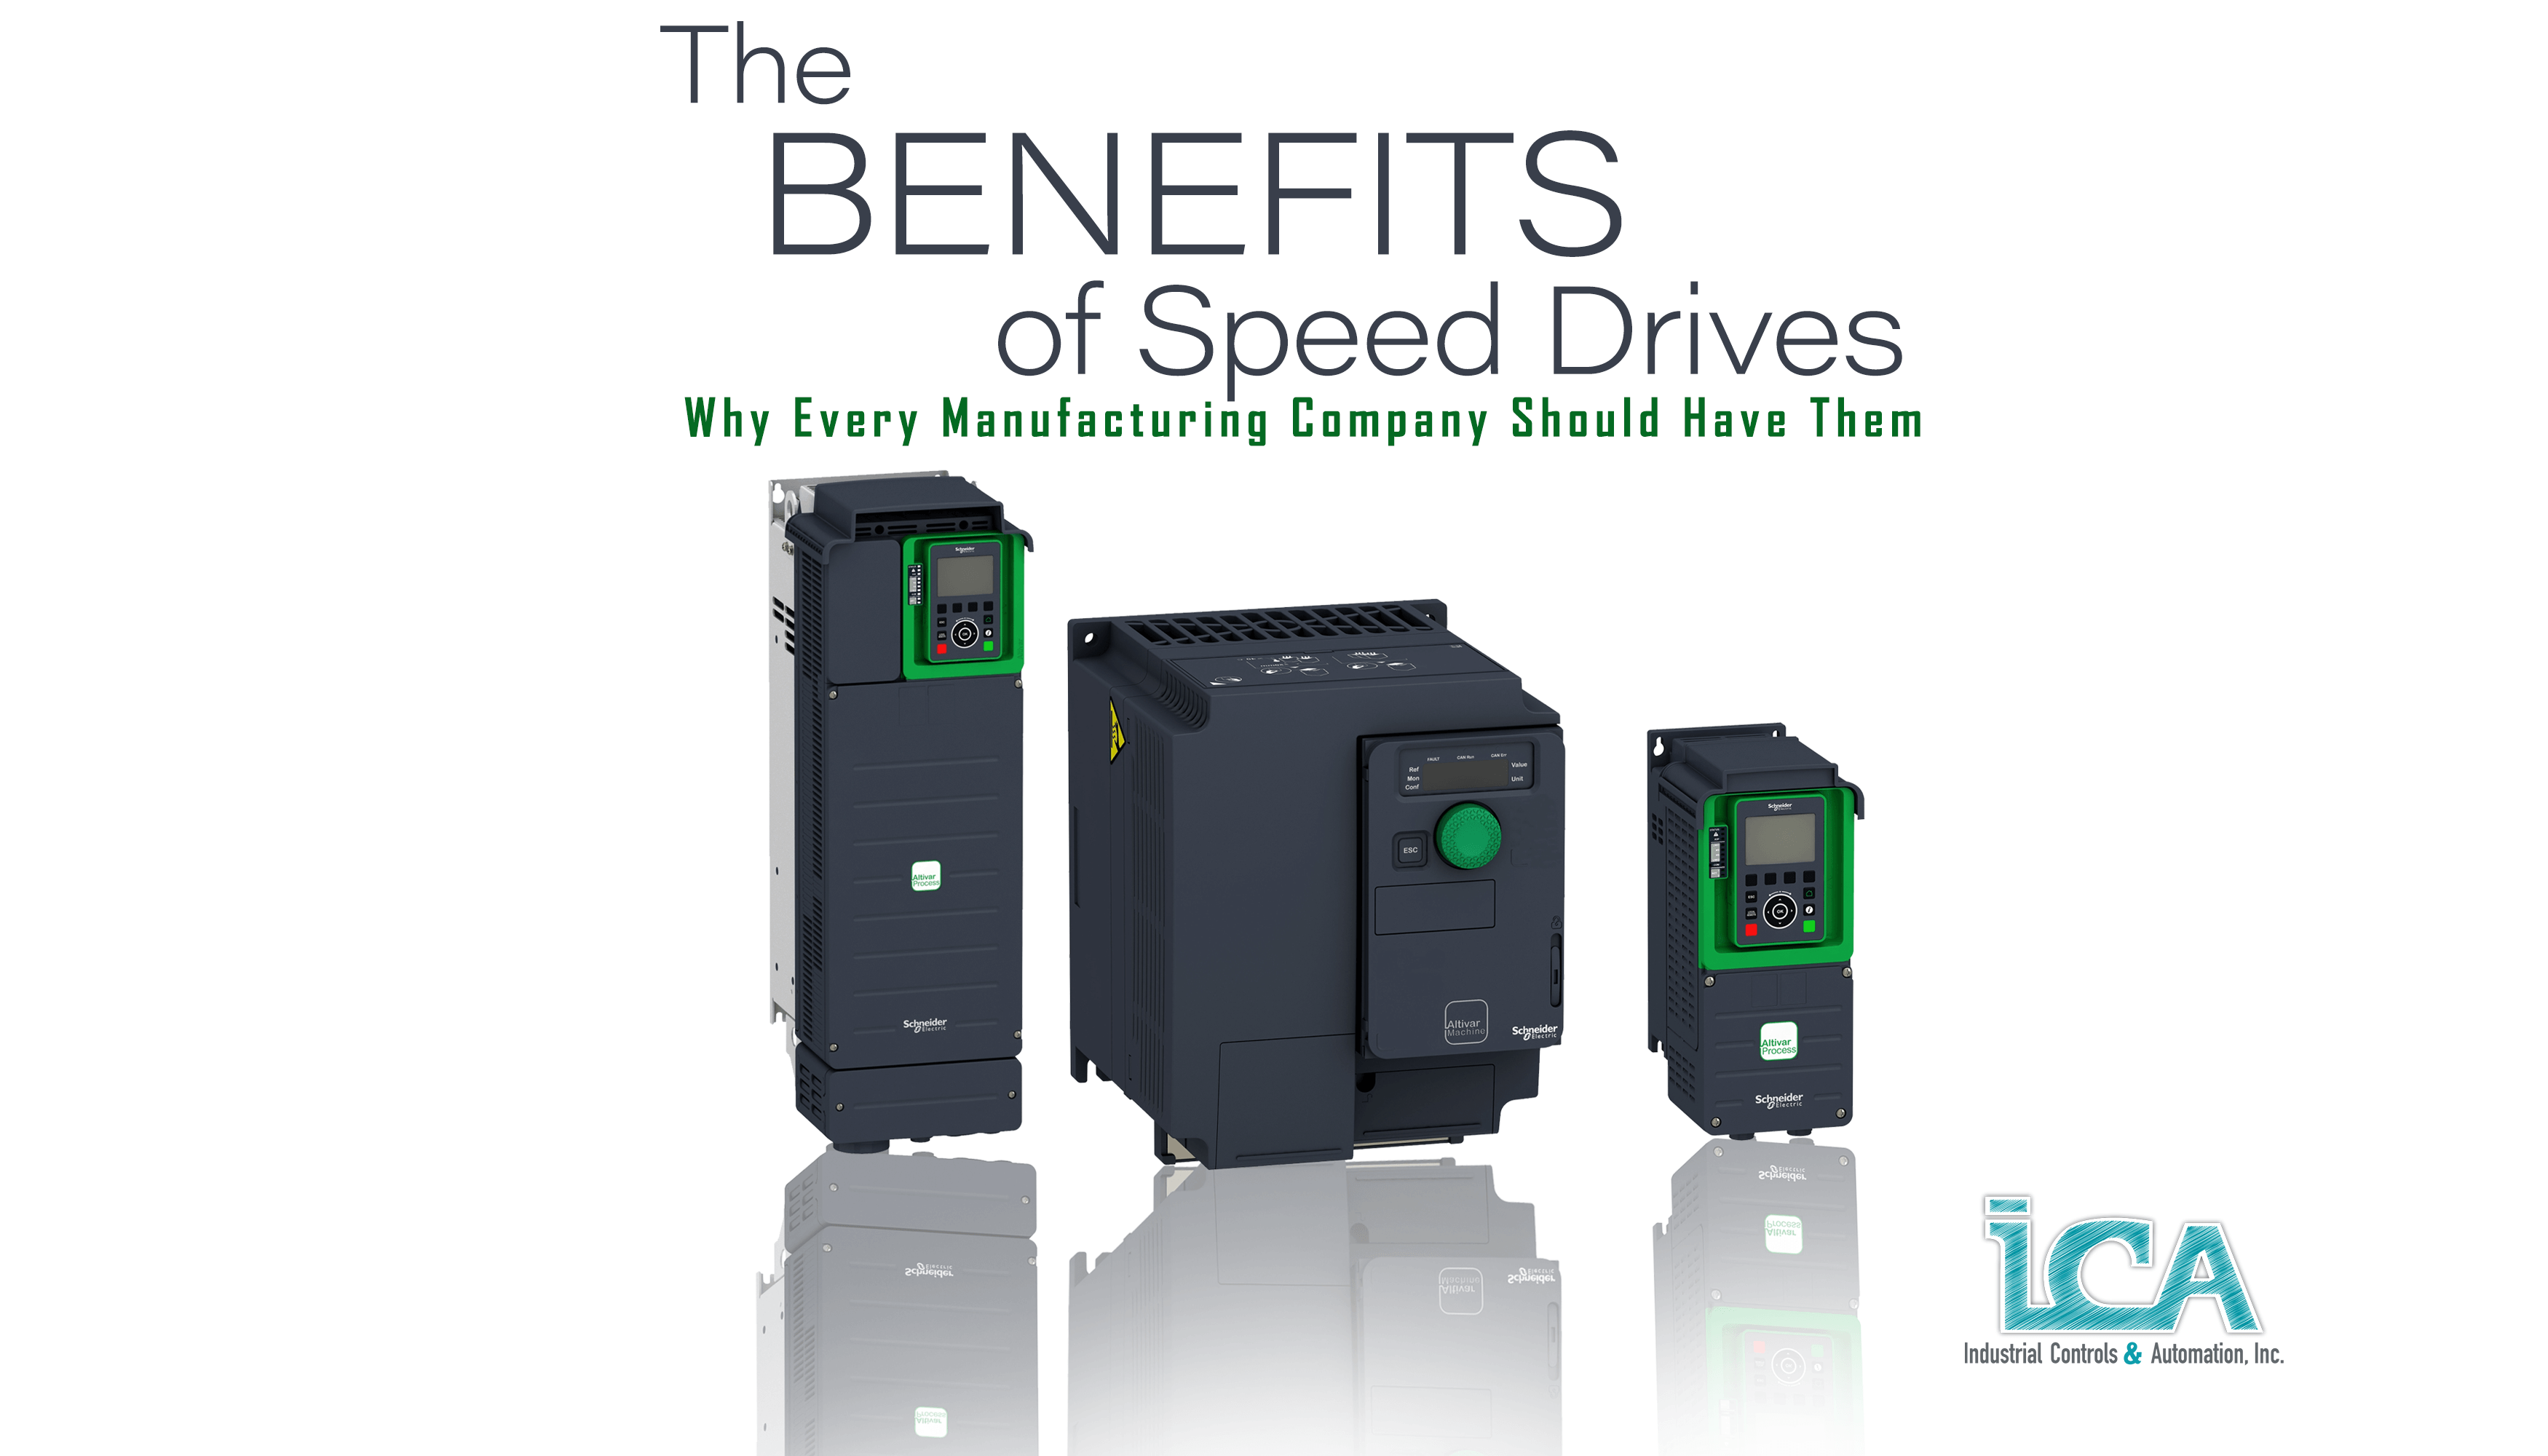 The Benefits of Having Speed Drives in your Manufacturing Company